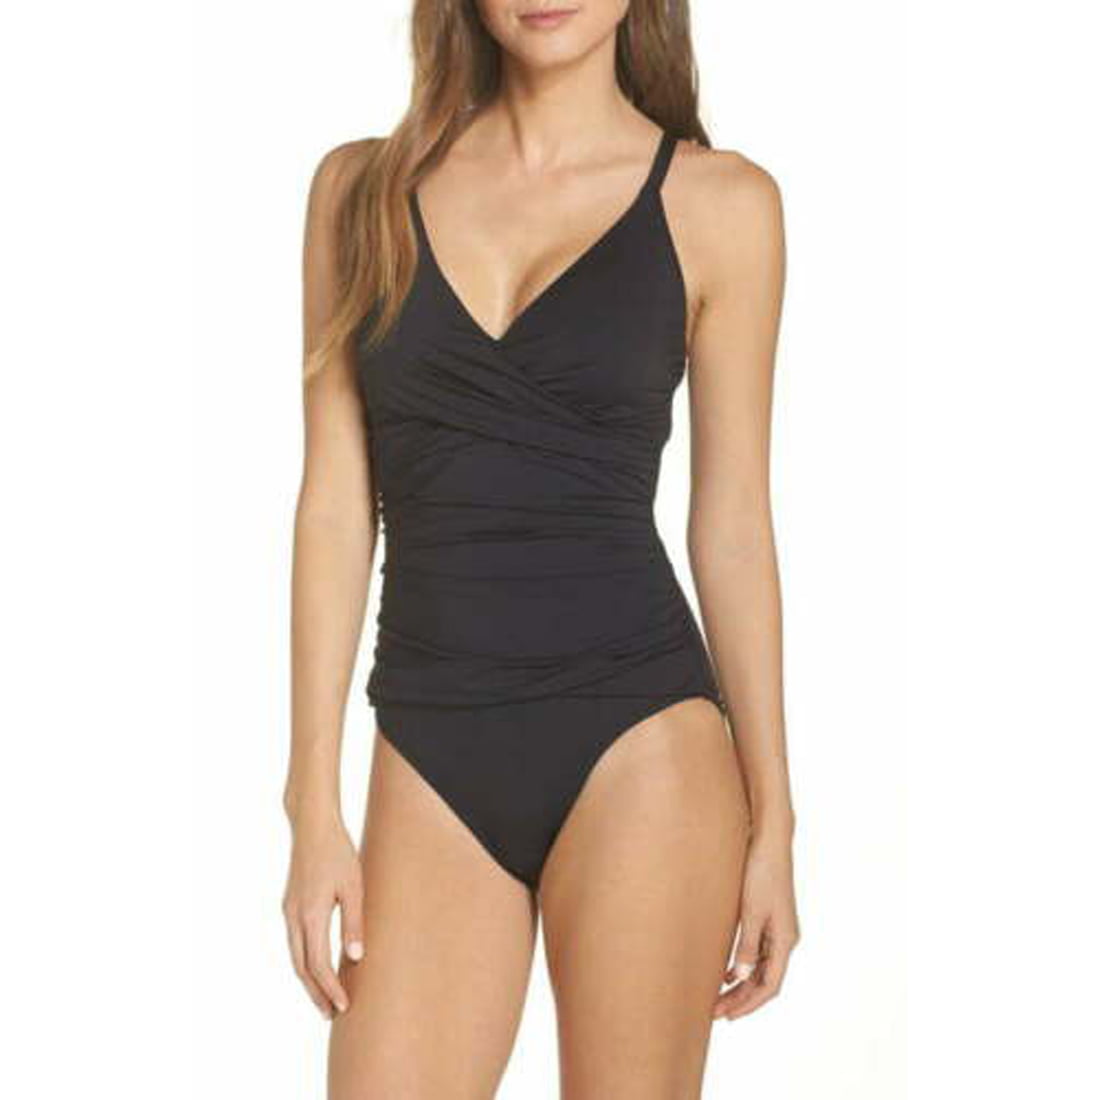 tommy bahama pearl one piece